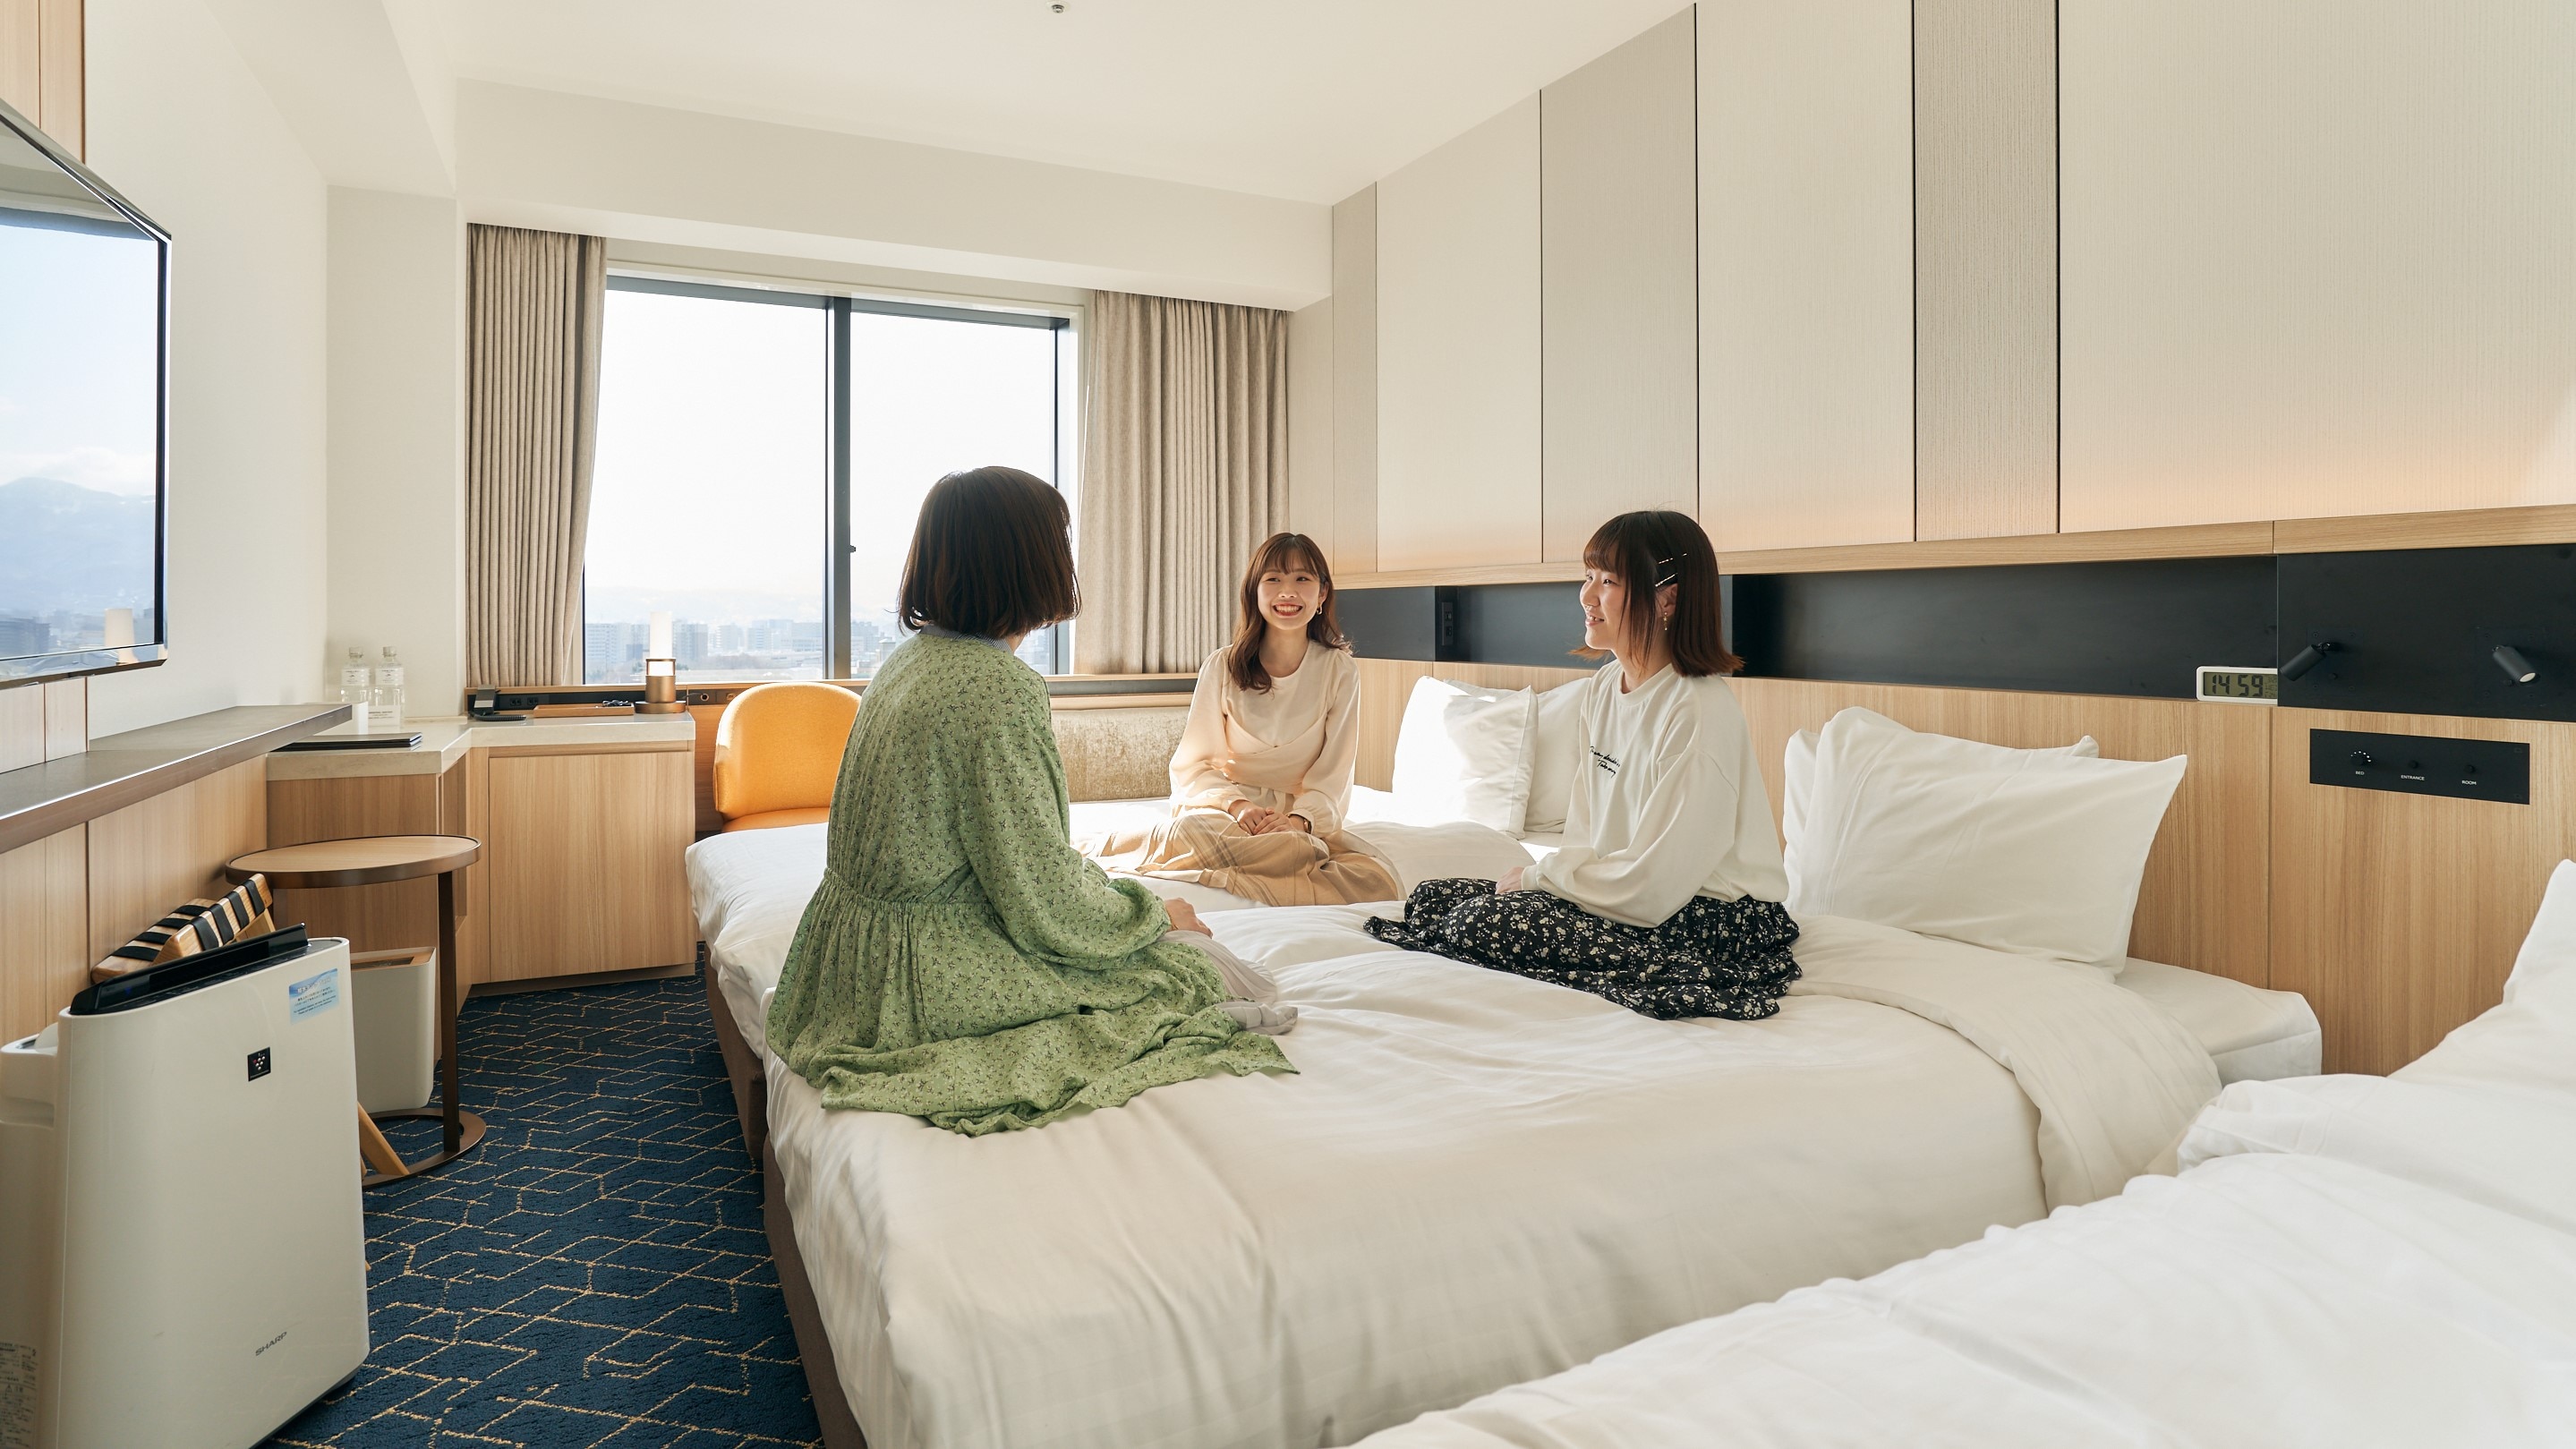 [Superior twin] Accommodates up to 3 people ☆ The view from the upper floors naturally encourages conversation.